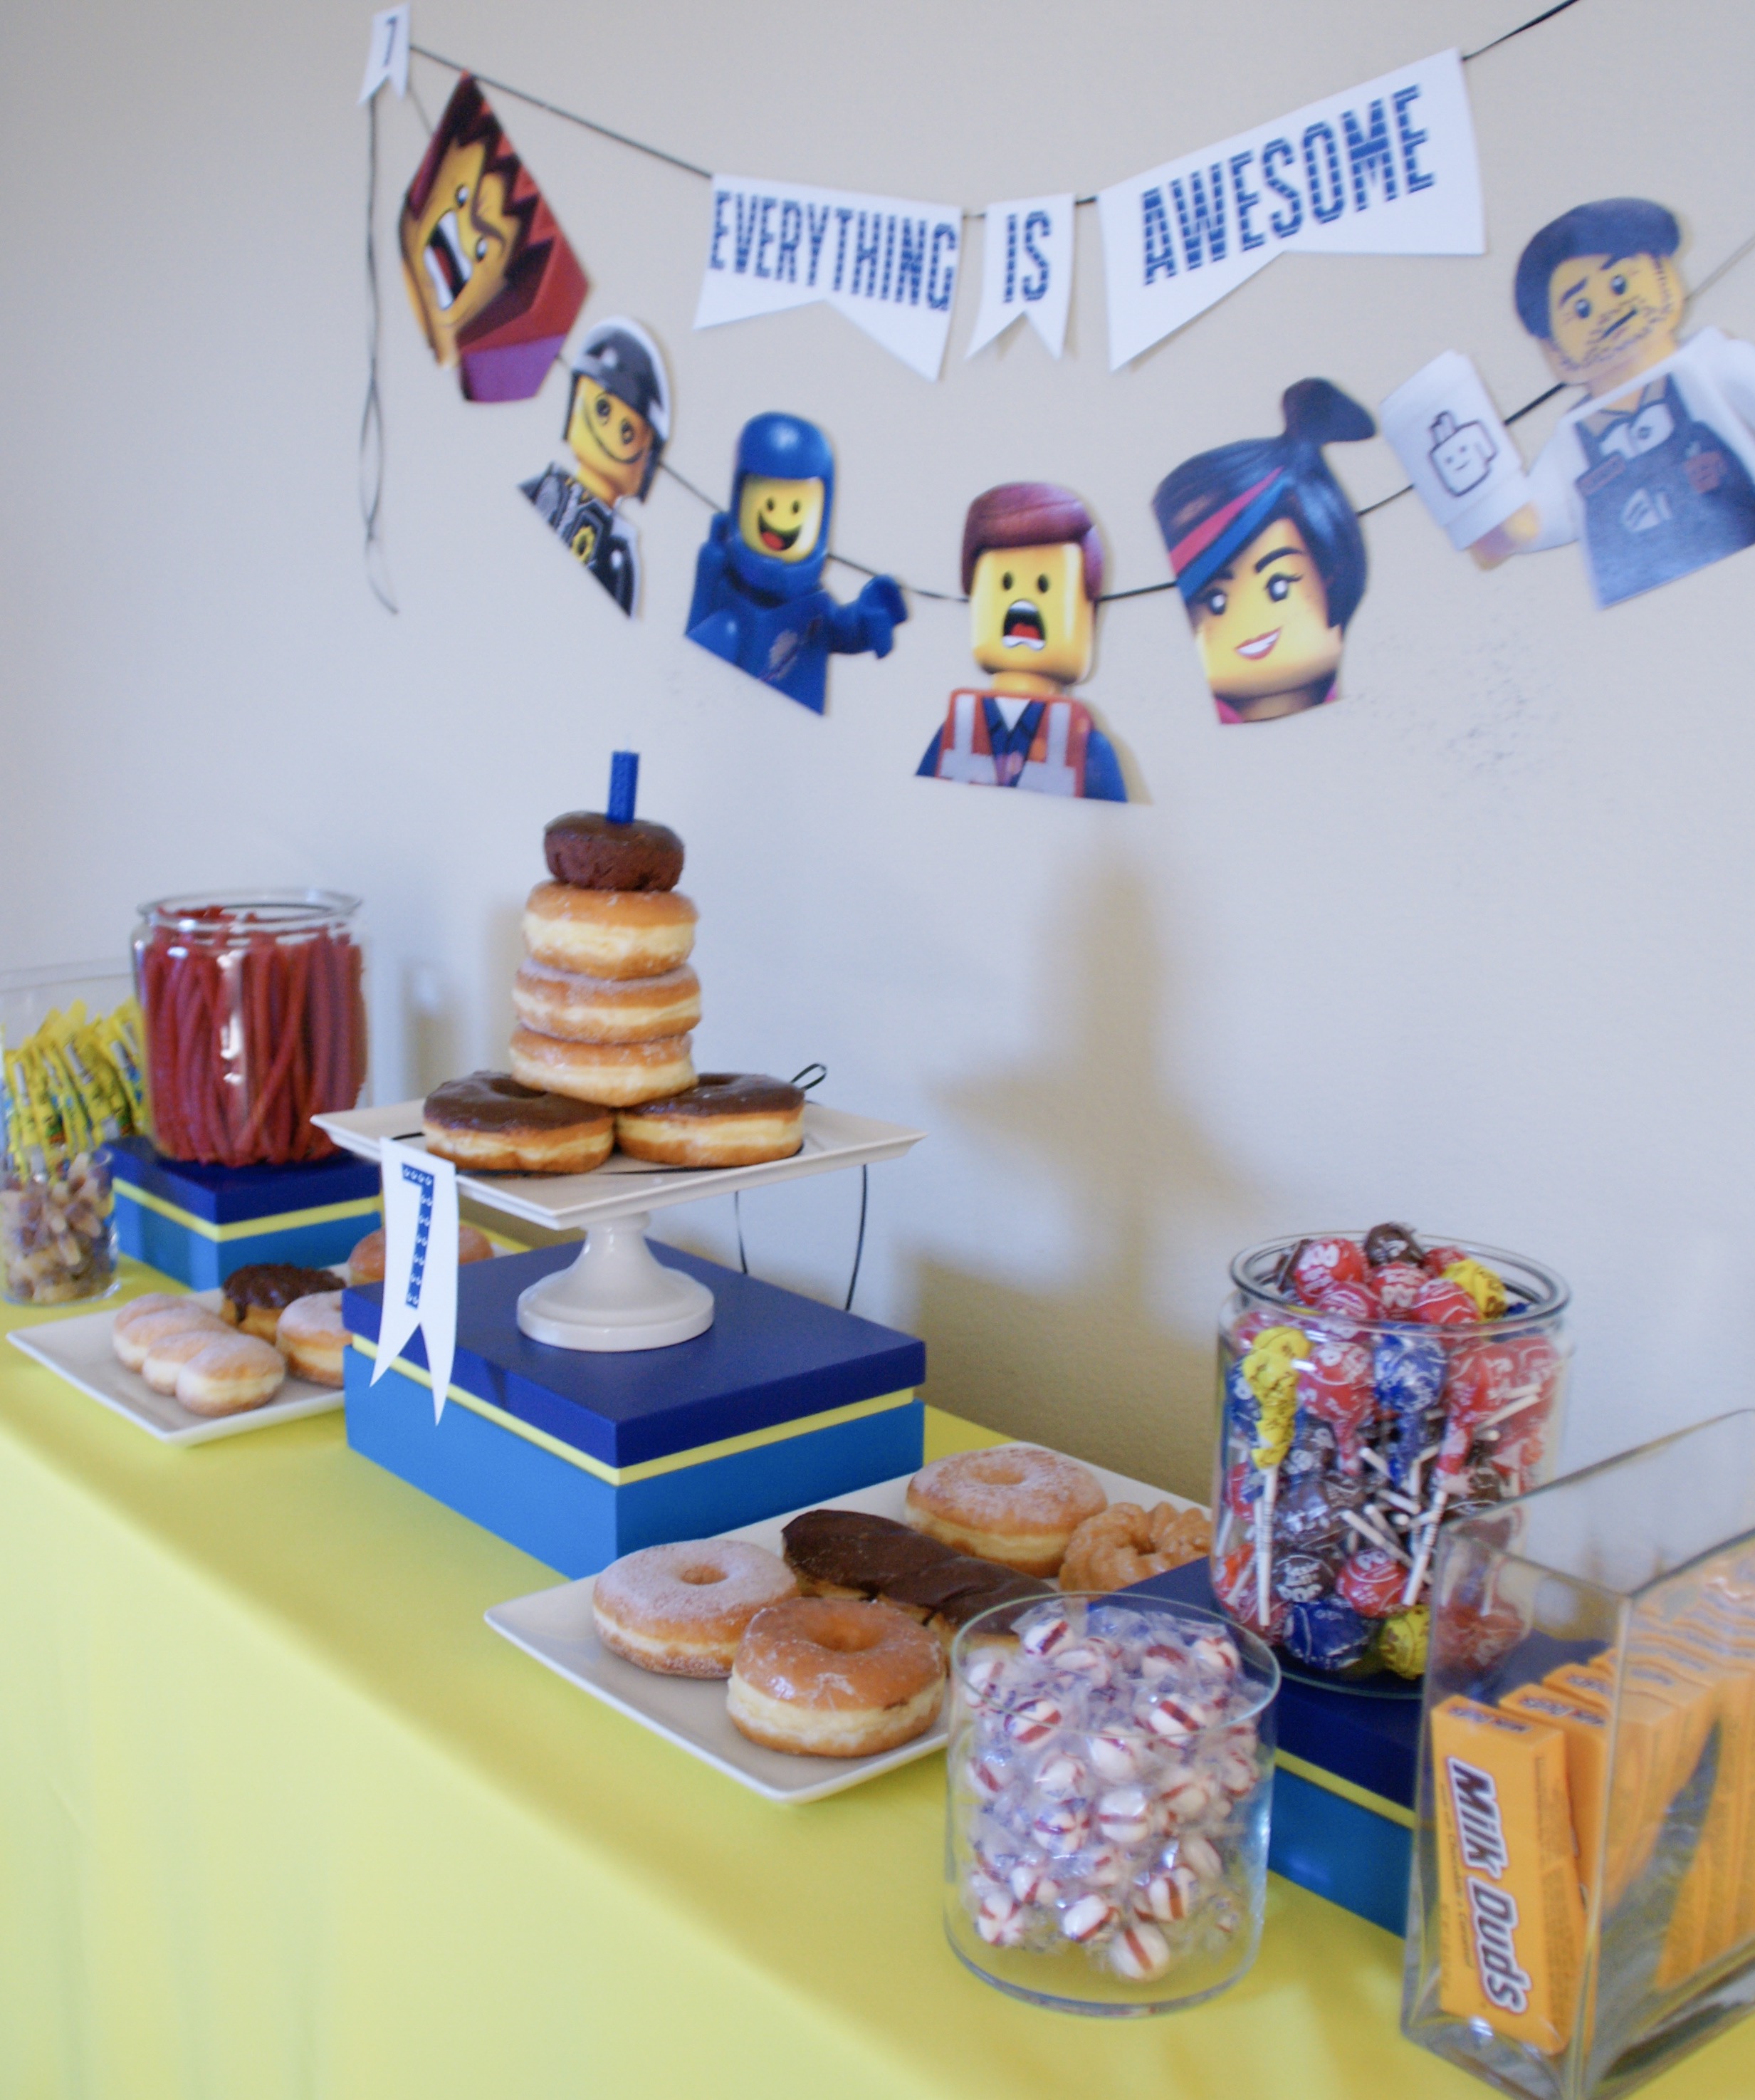 "Everything is Awesome" Lego birthday party 